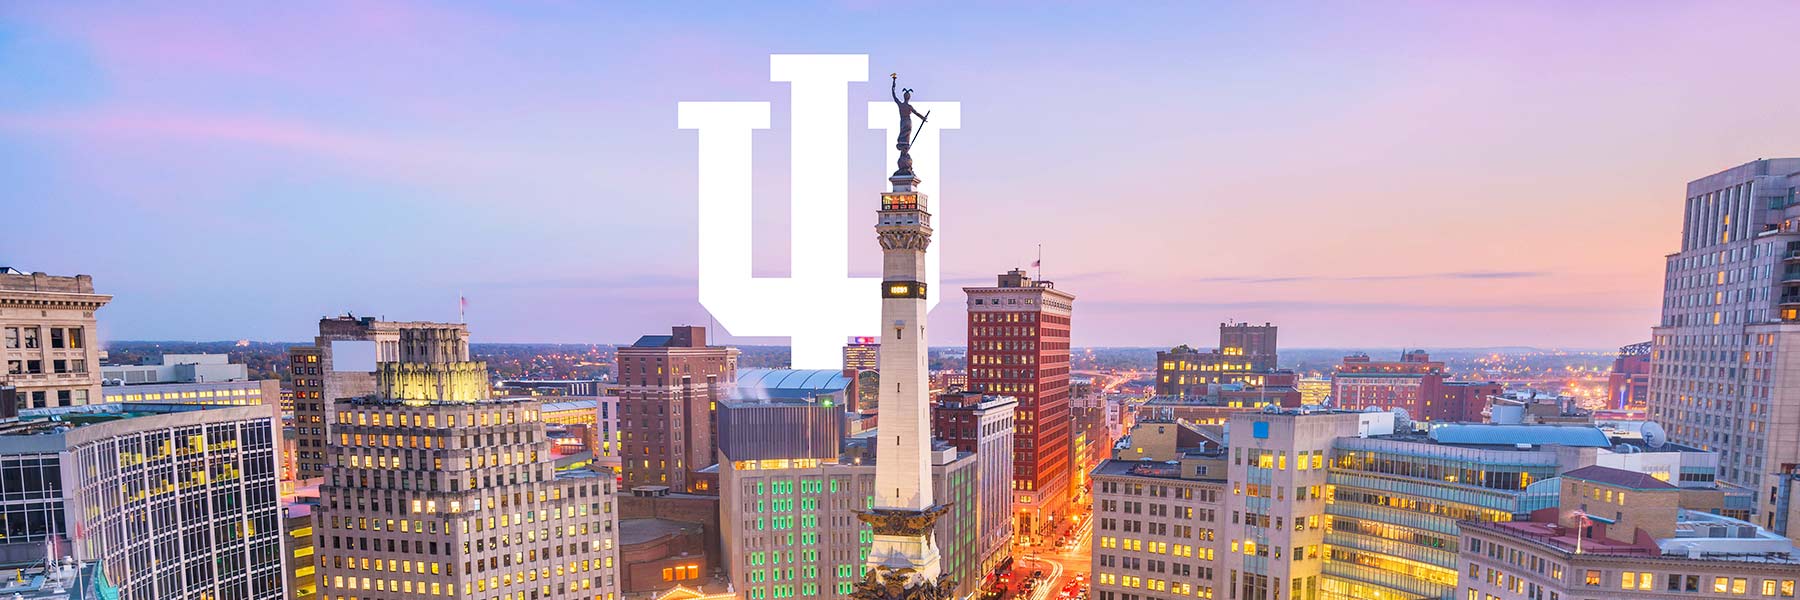 The Indianapolis Soliders and Sailors Monument is pictured with colorful sky in the backdrop. IU's Trident is seen in the skyline.